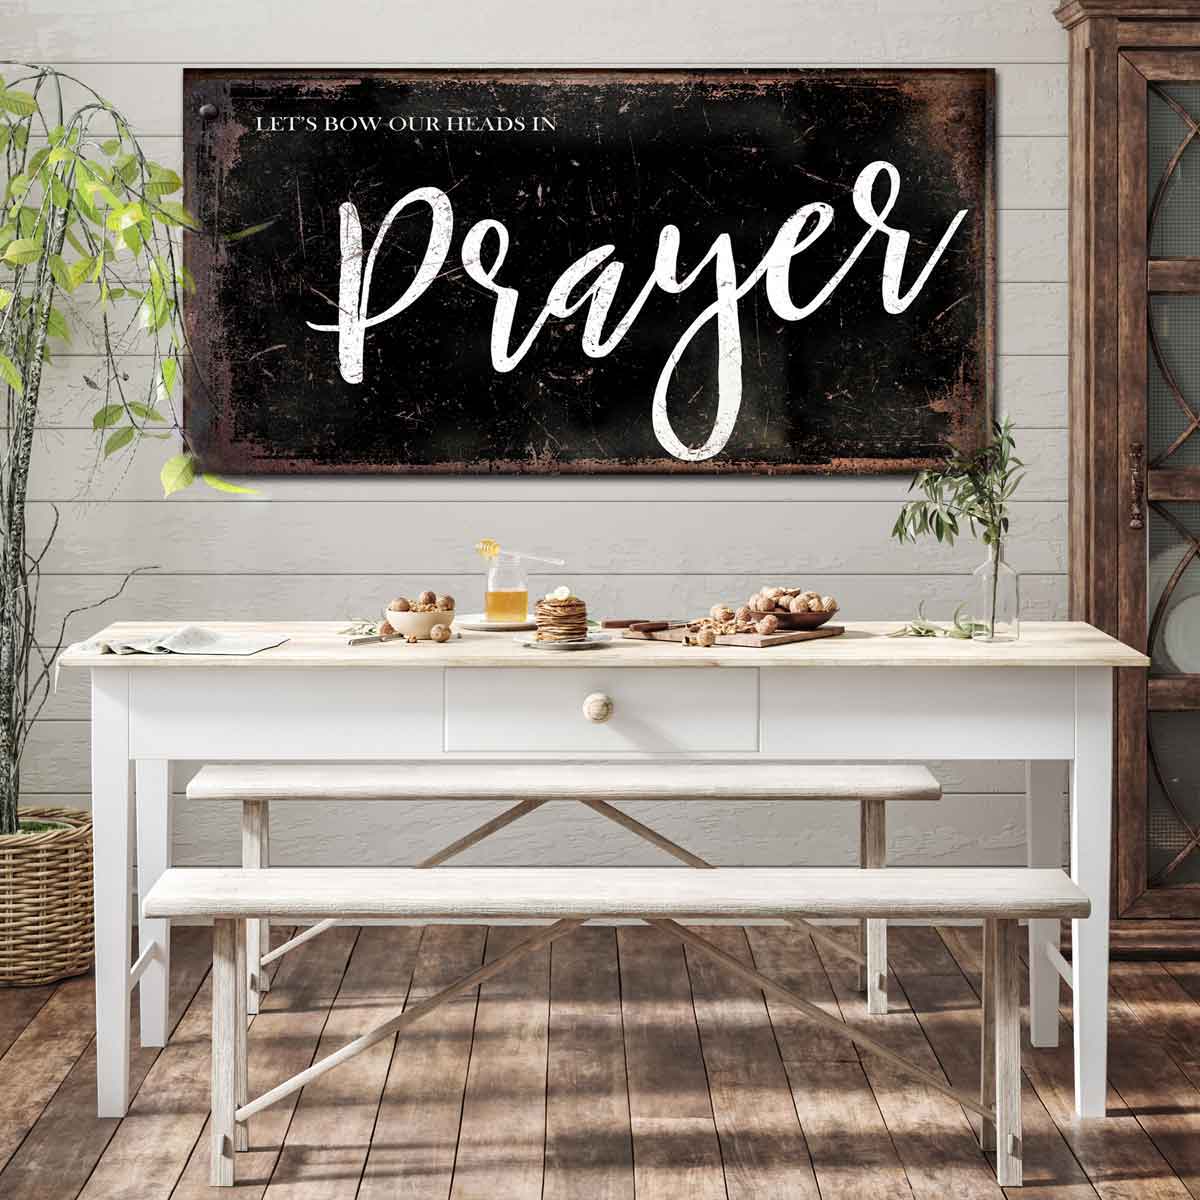 Rustic Modern Farmhouse Sign on faux rusty metal sign with the words: Let's Bow Our Heads in Prayer